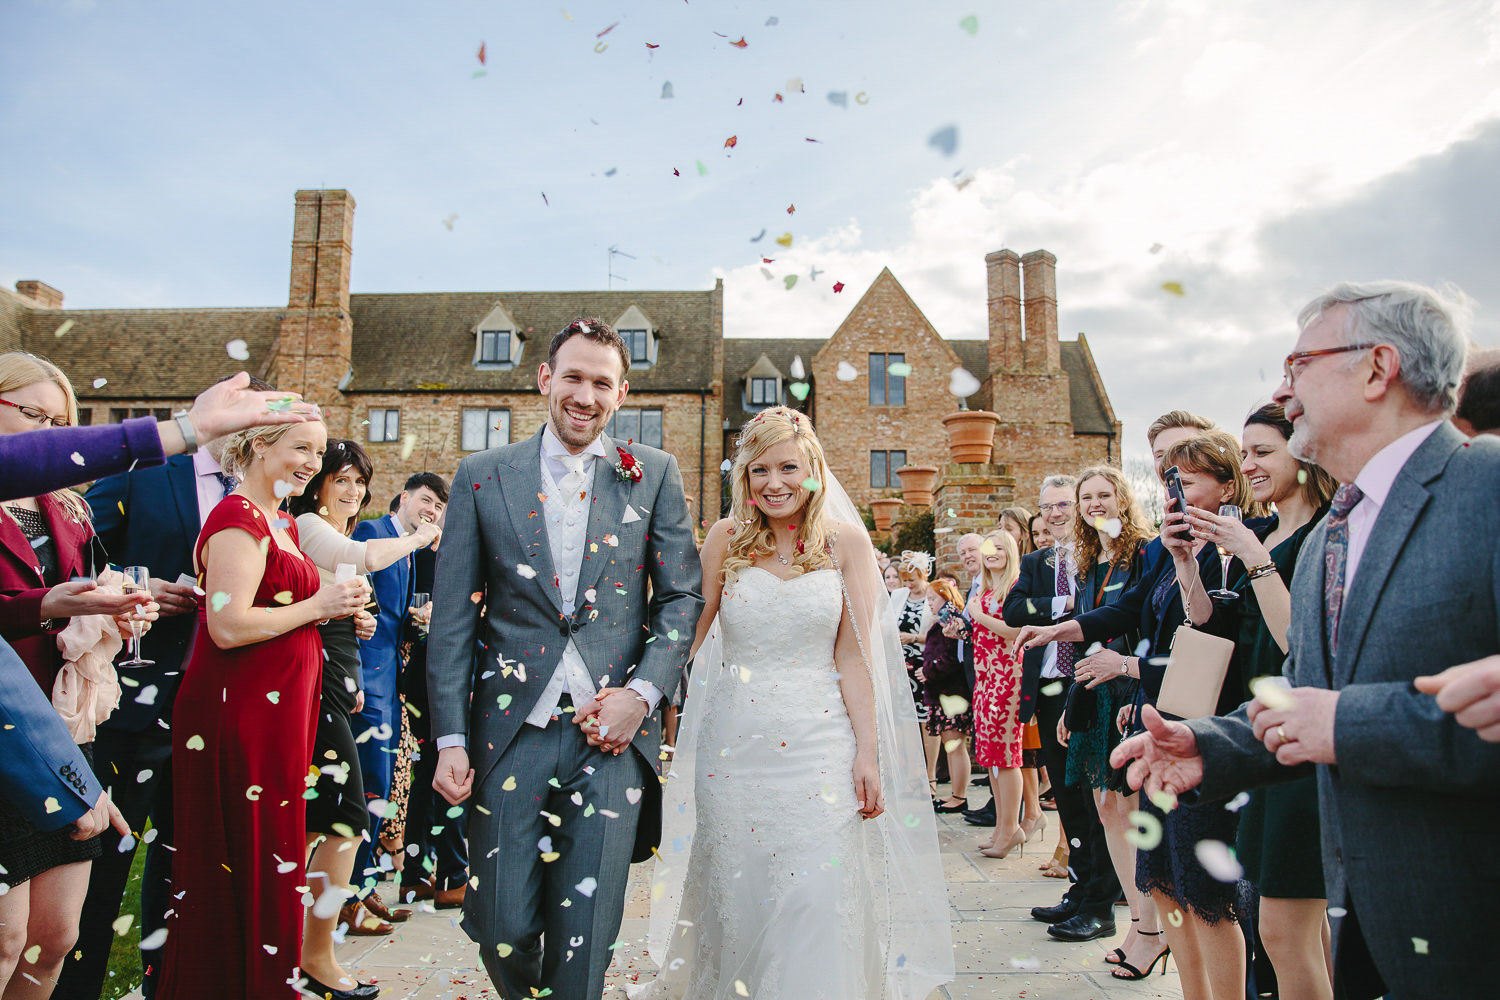 Bride and groom at the Old Hall Ely walking through confetti.